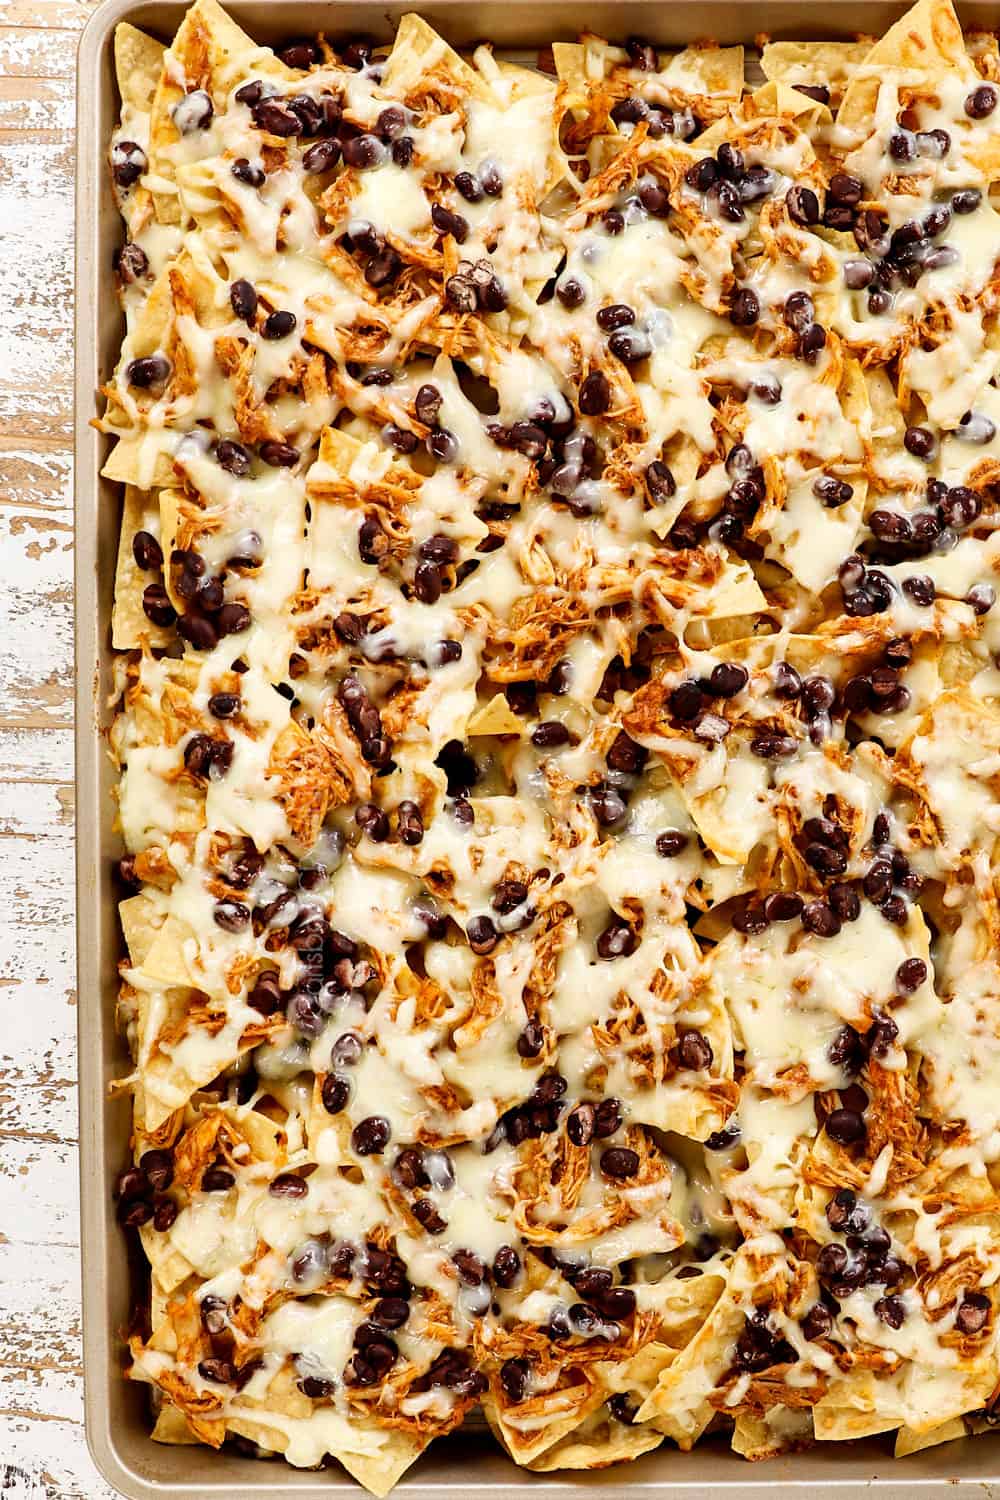 showing how to make shredded chicken nachos recipe by melting cheese over nachos in the oven